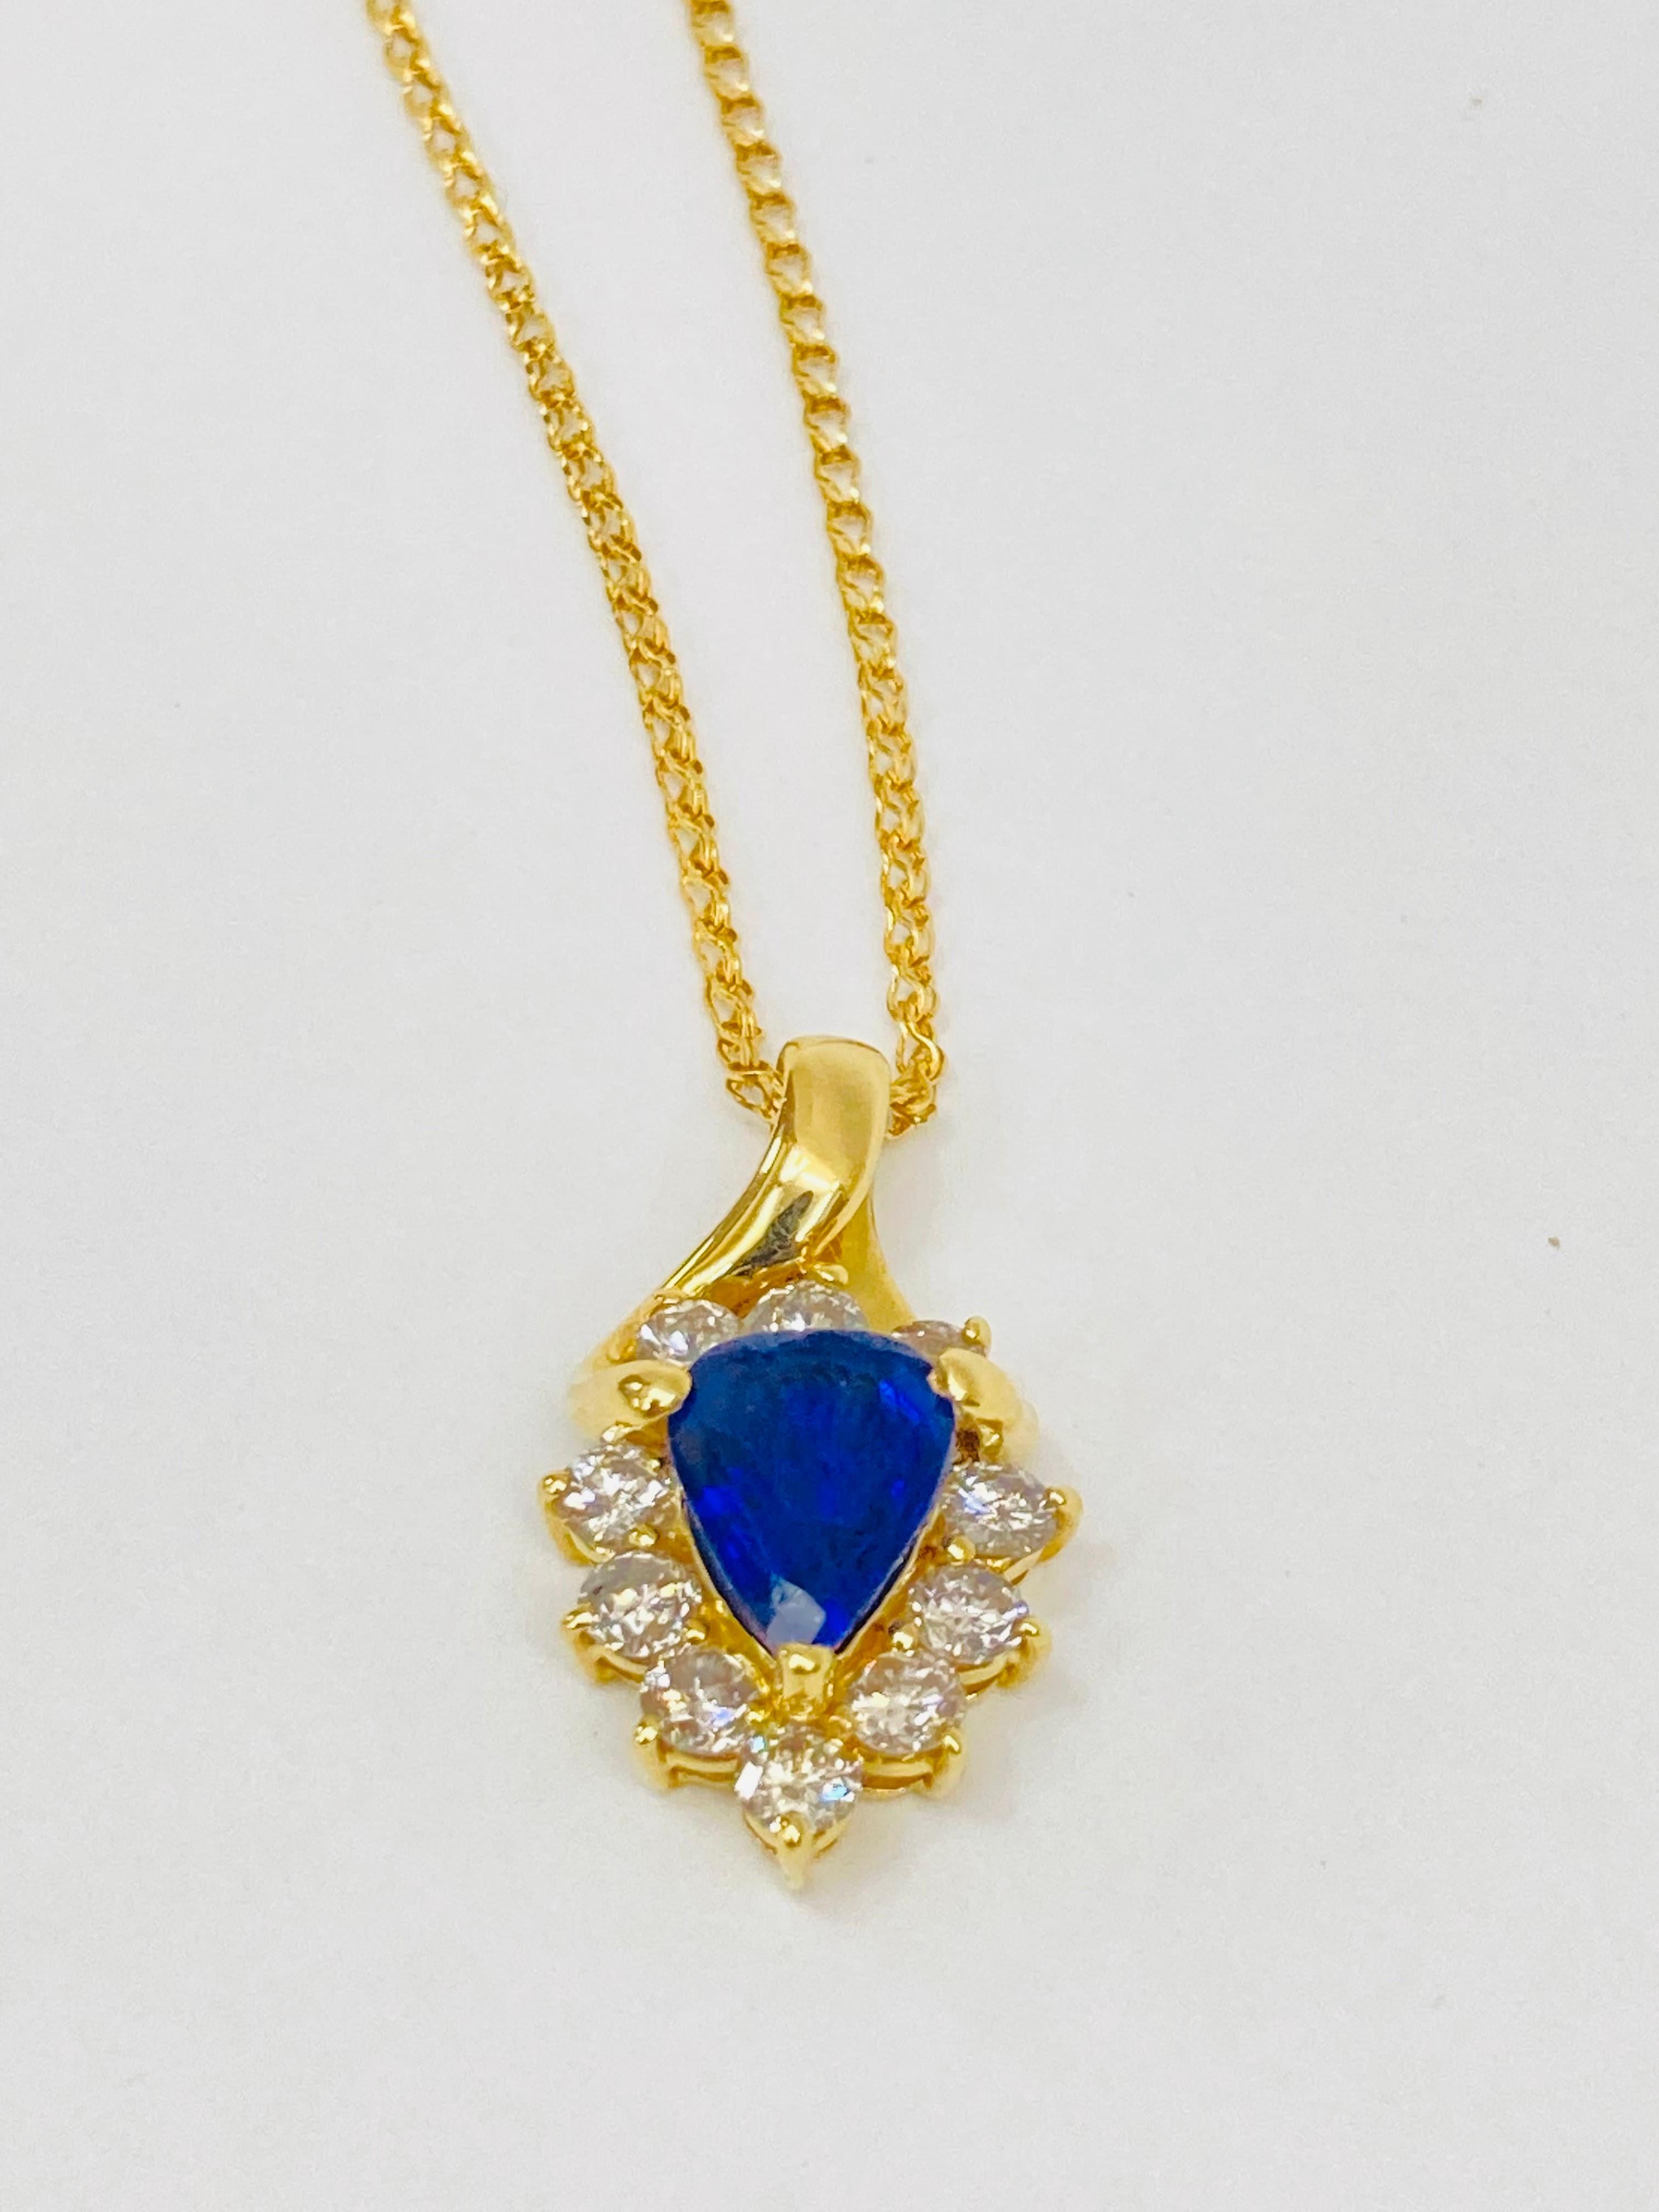 Bochic “Retro Vintage” Blue Sapphire  & Diamond Cluster Neck Set In 18K Gold 

Natural Blue Sapphire Pear Shape 1.03 Carat 
From Sri Lanka 
Diamonds 0.55 Carat 
F color 
VS clarity 
18K Yellow Gold
5.10 Gram

This Necklace is from the 